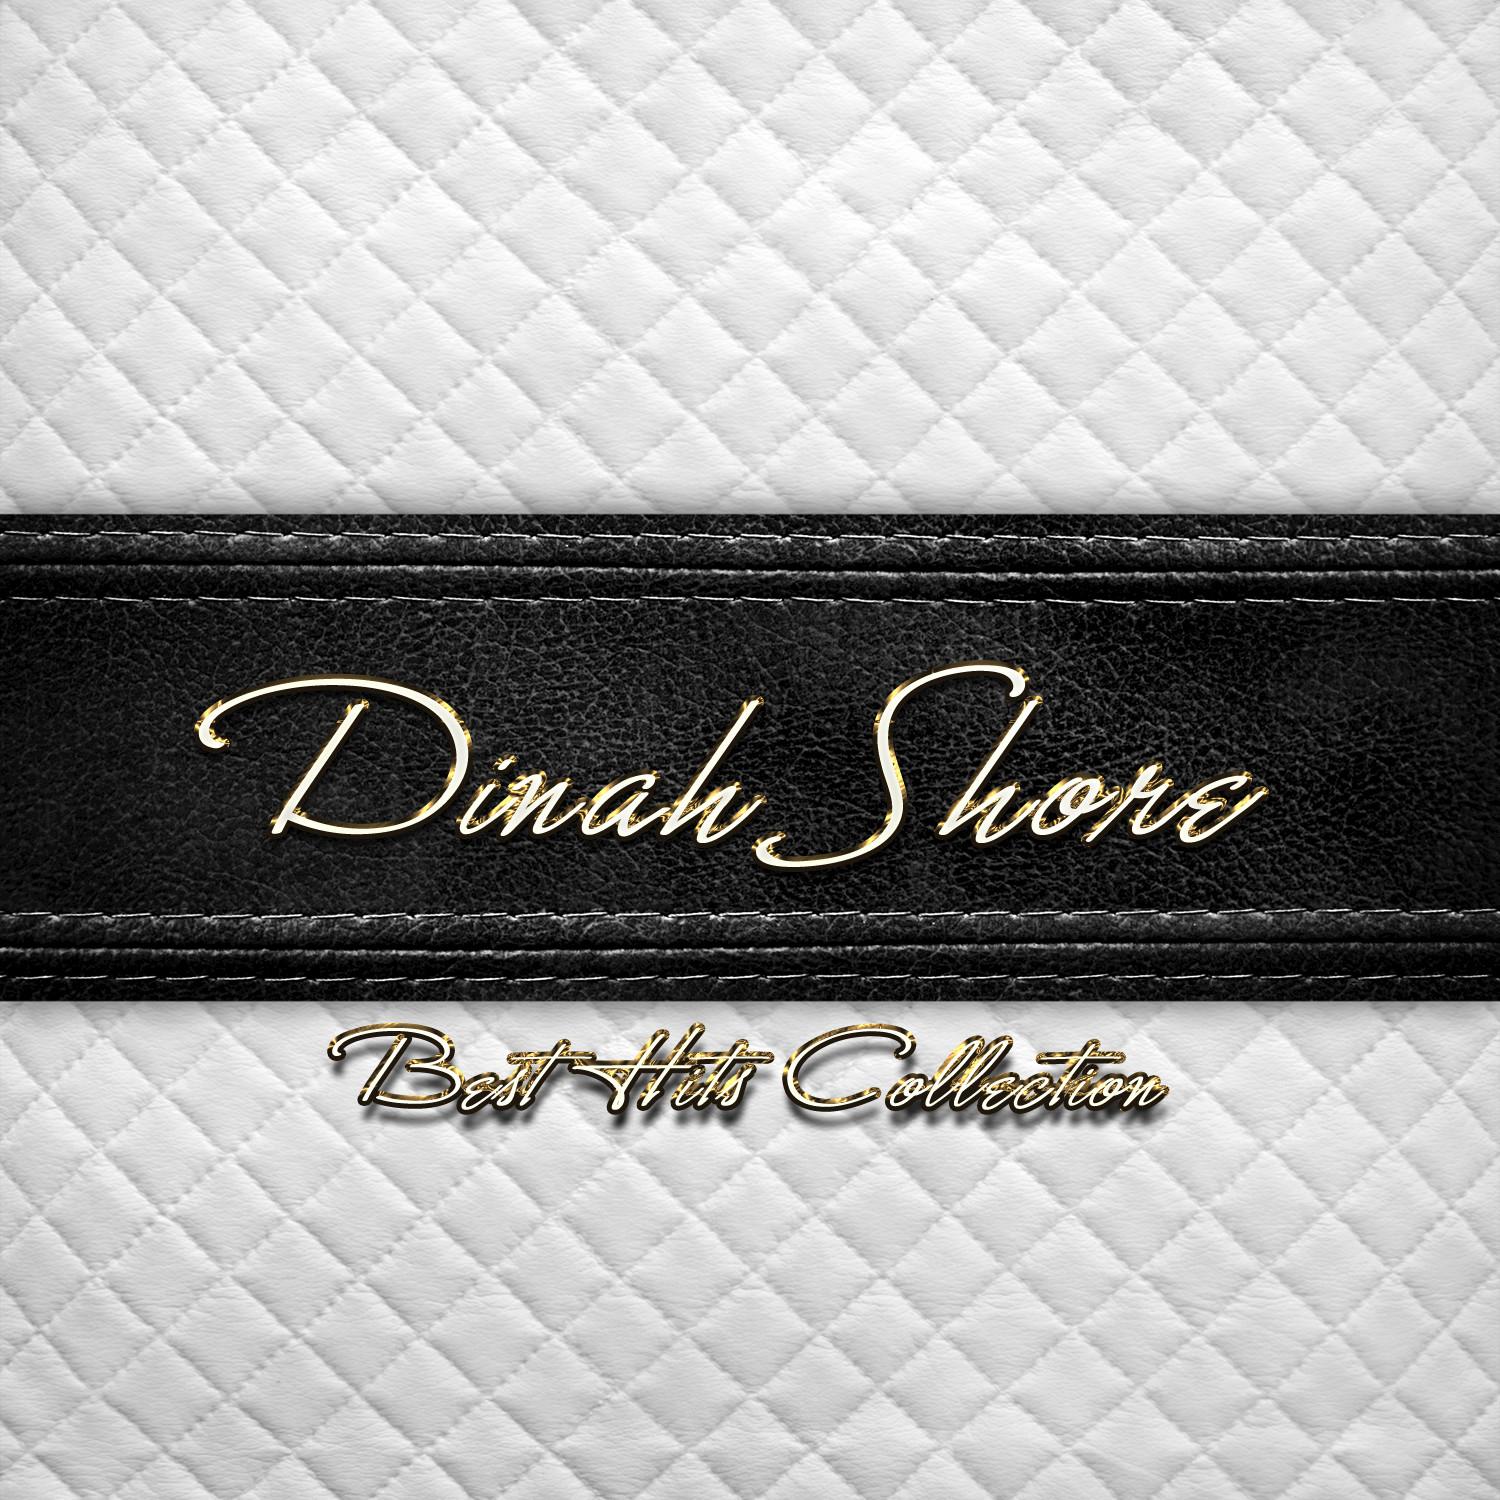 Best Hits Collection of Dinah Shore